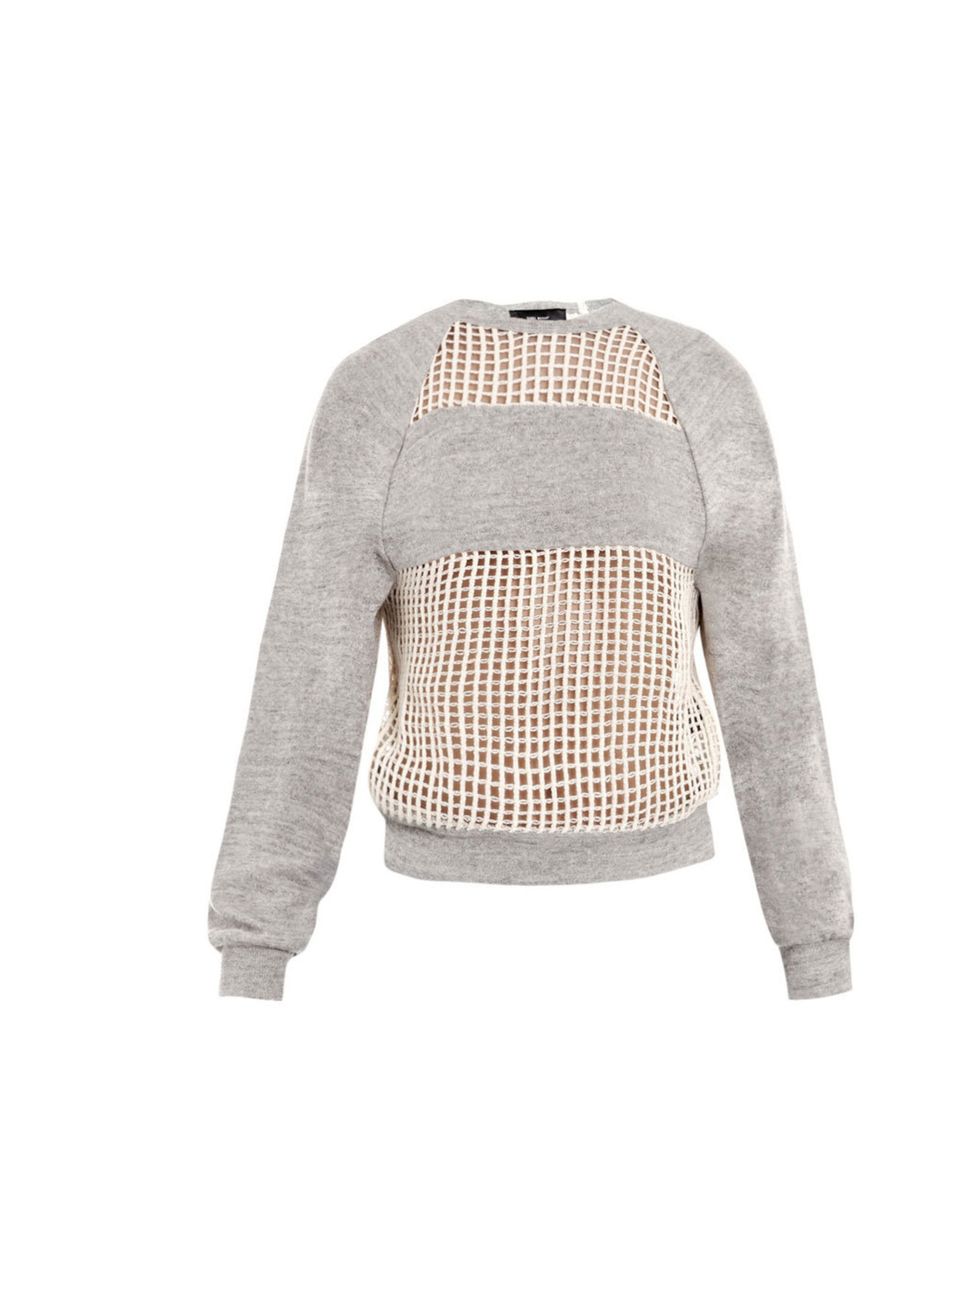 <p>Everyone loves a sport-luxe sweater. So it makes fashion sense to invest in one from the lady who kicked started the trend Isabel Marantmesh panel sports luxe sweater, £195, at Matches</p><p><a href="http://shopping.elleuk.com/browse?fts=isabel+marant